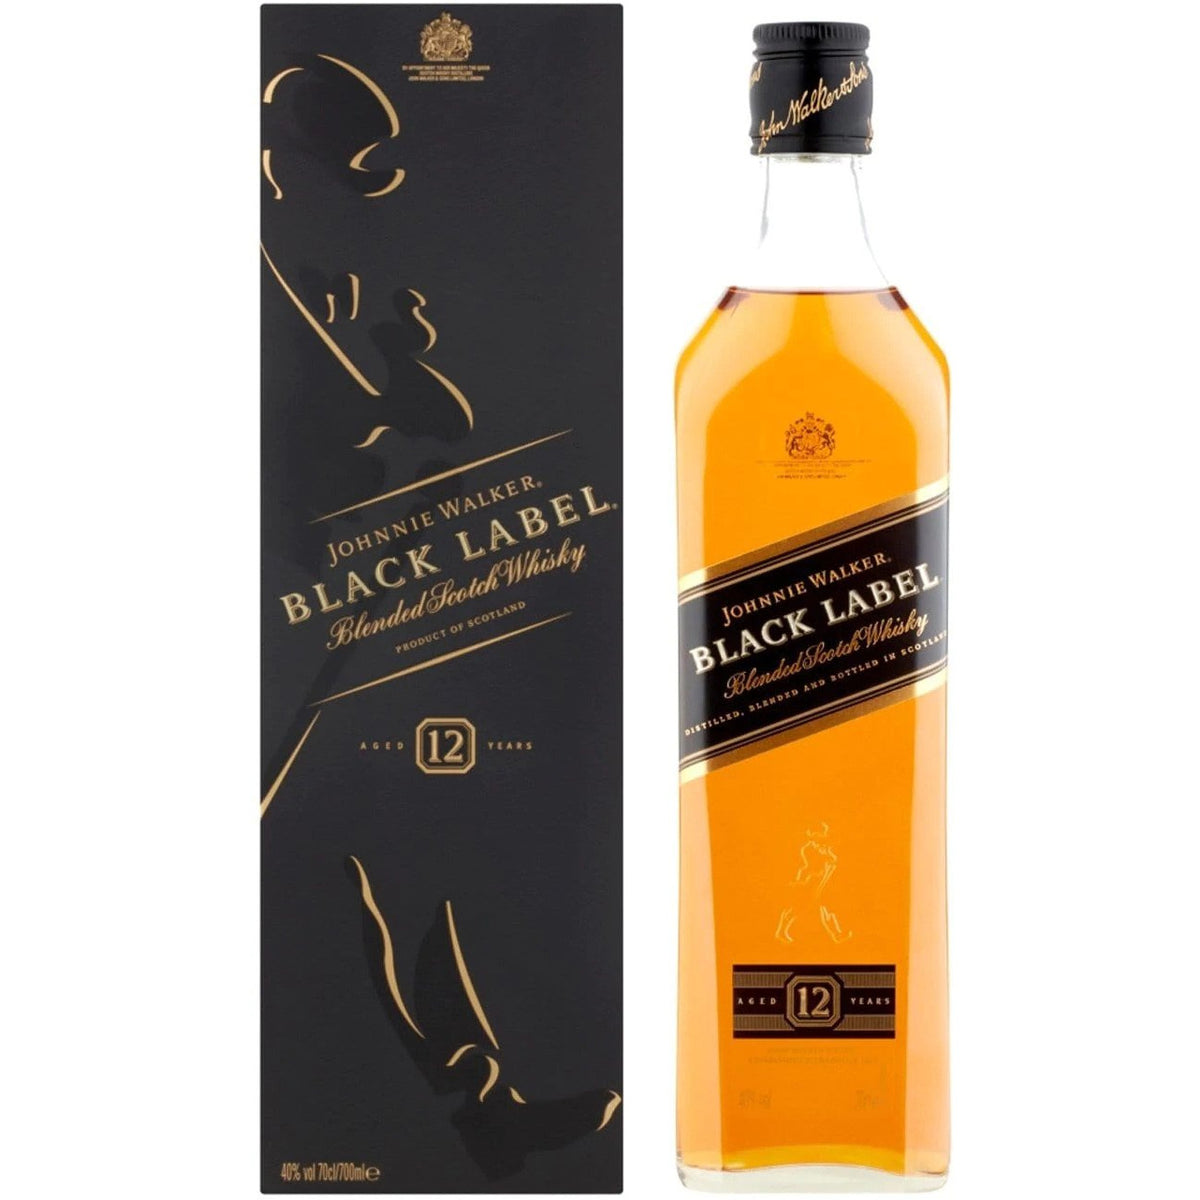 Johnnie Walker Black Label - Luxurious Ex A Club — Whisky Blended Liquor The 12-Year-Old